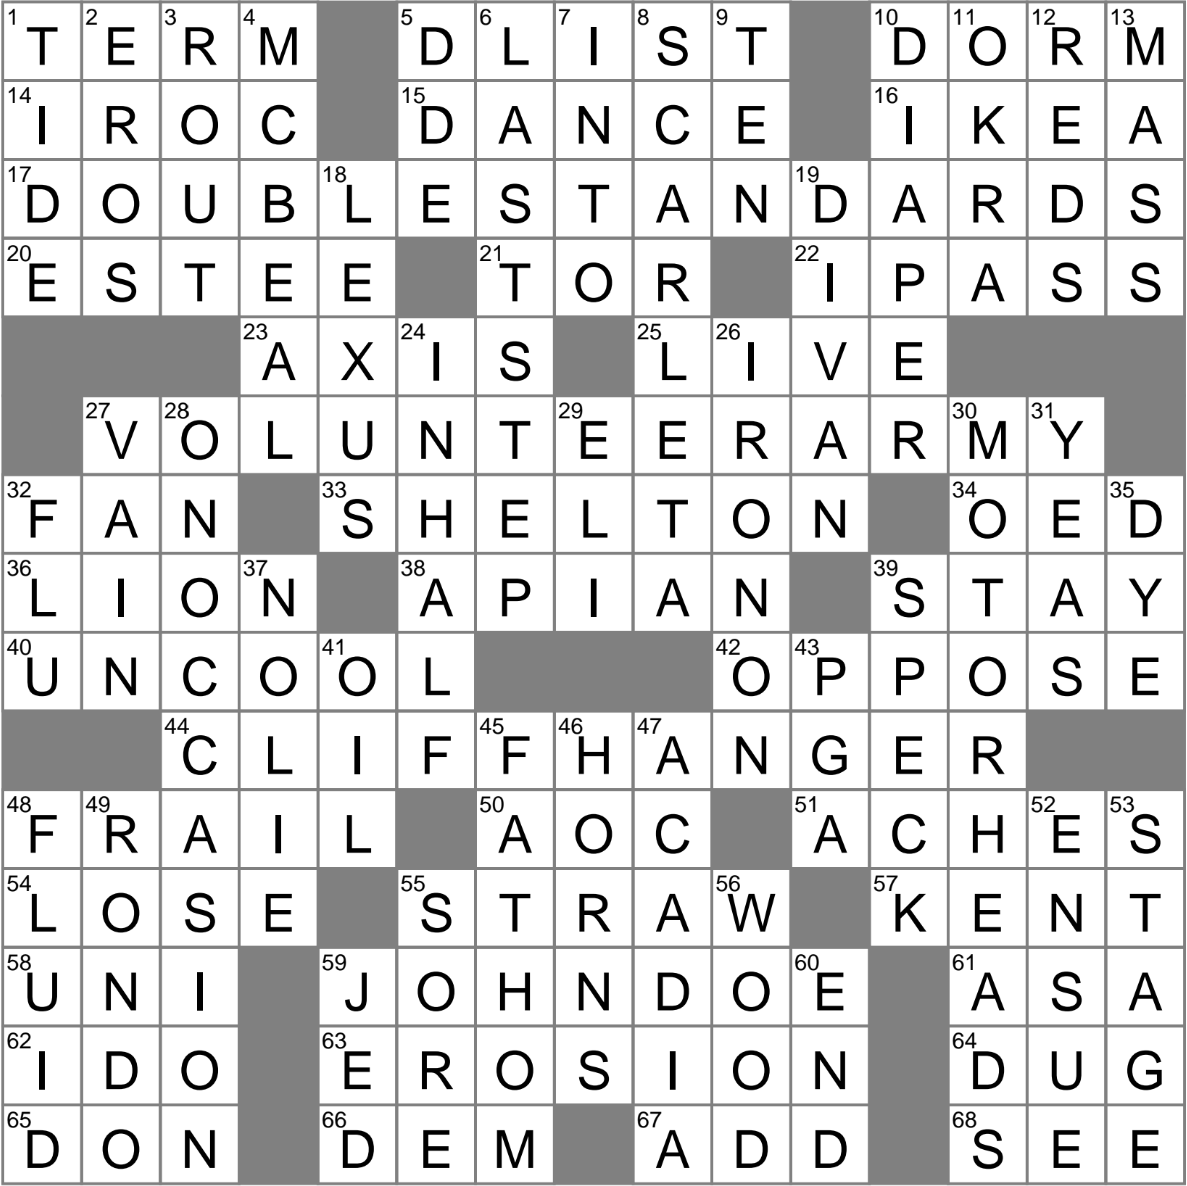 Car enthusiasts slangily crossword clue Archives LAXCrossword com